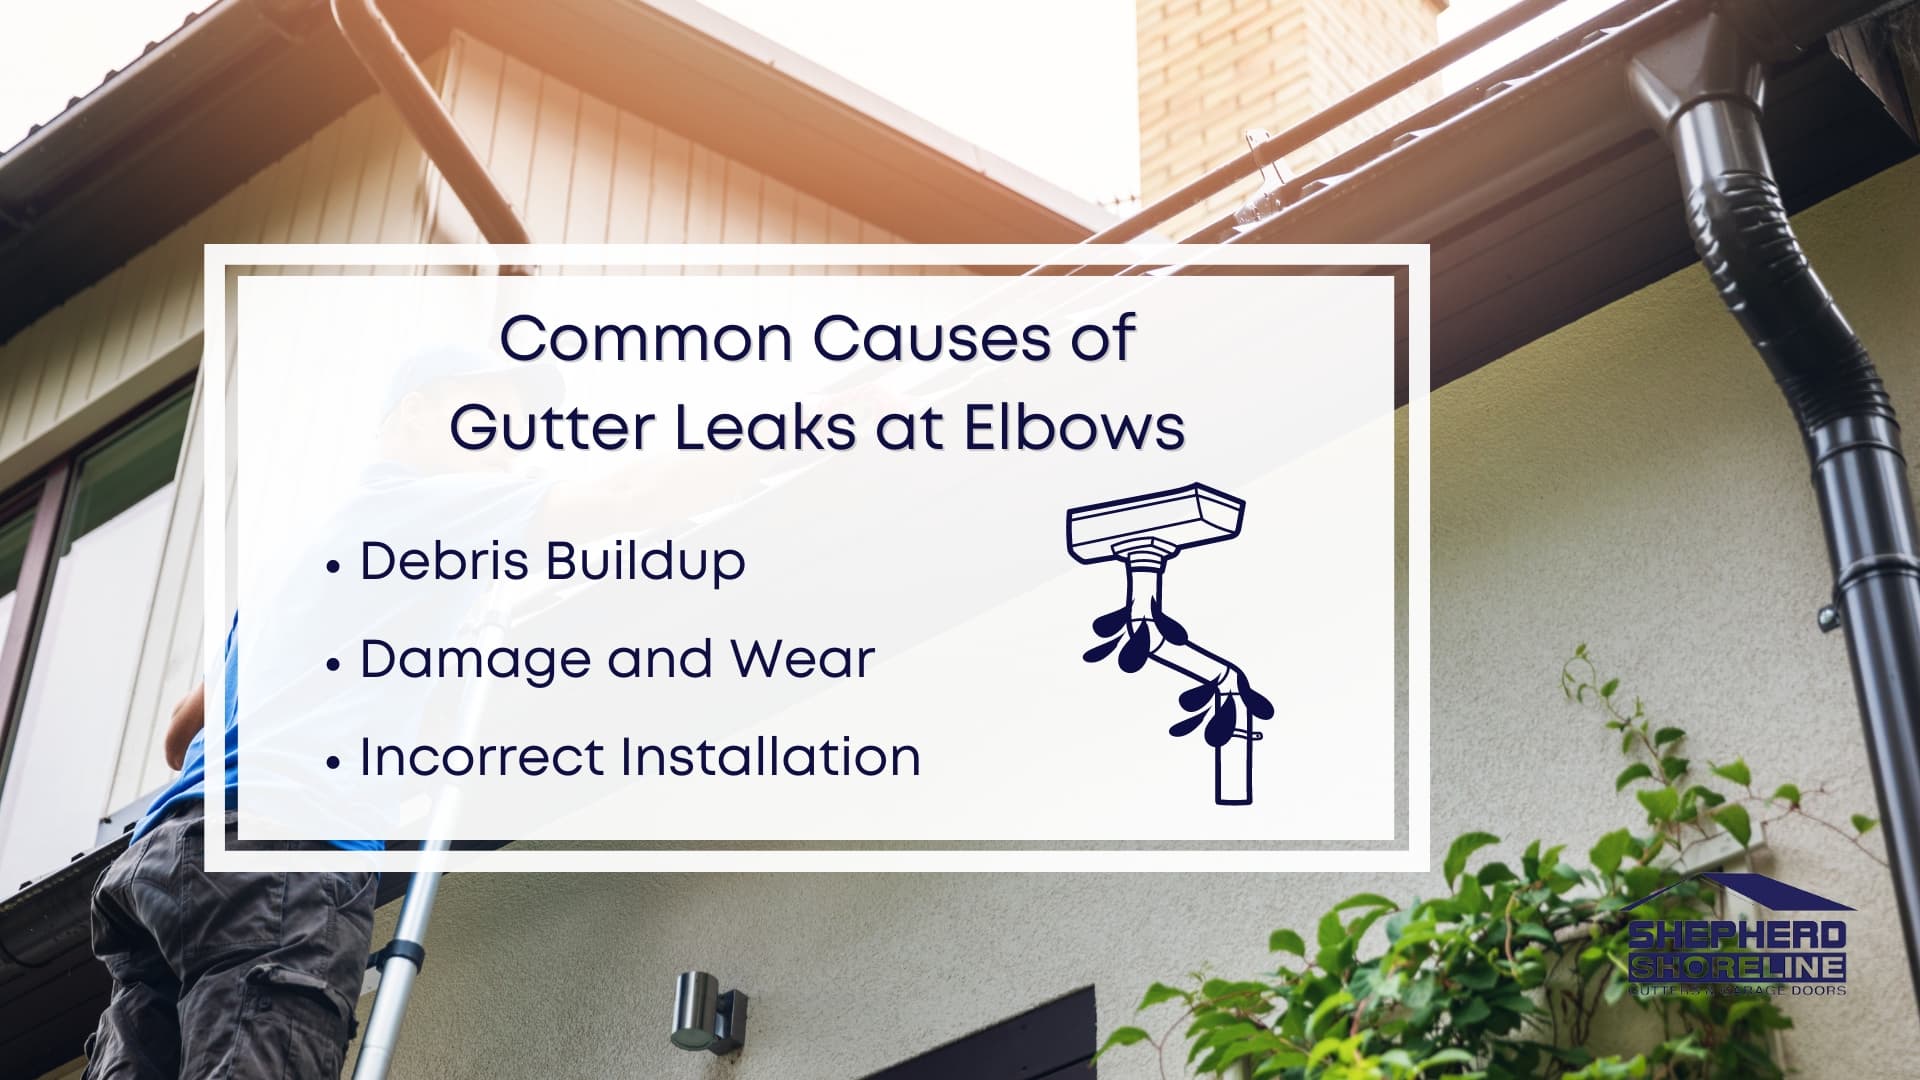 Infographic image of common causes of gutter leaks at elbows